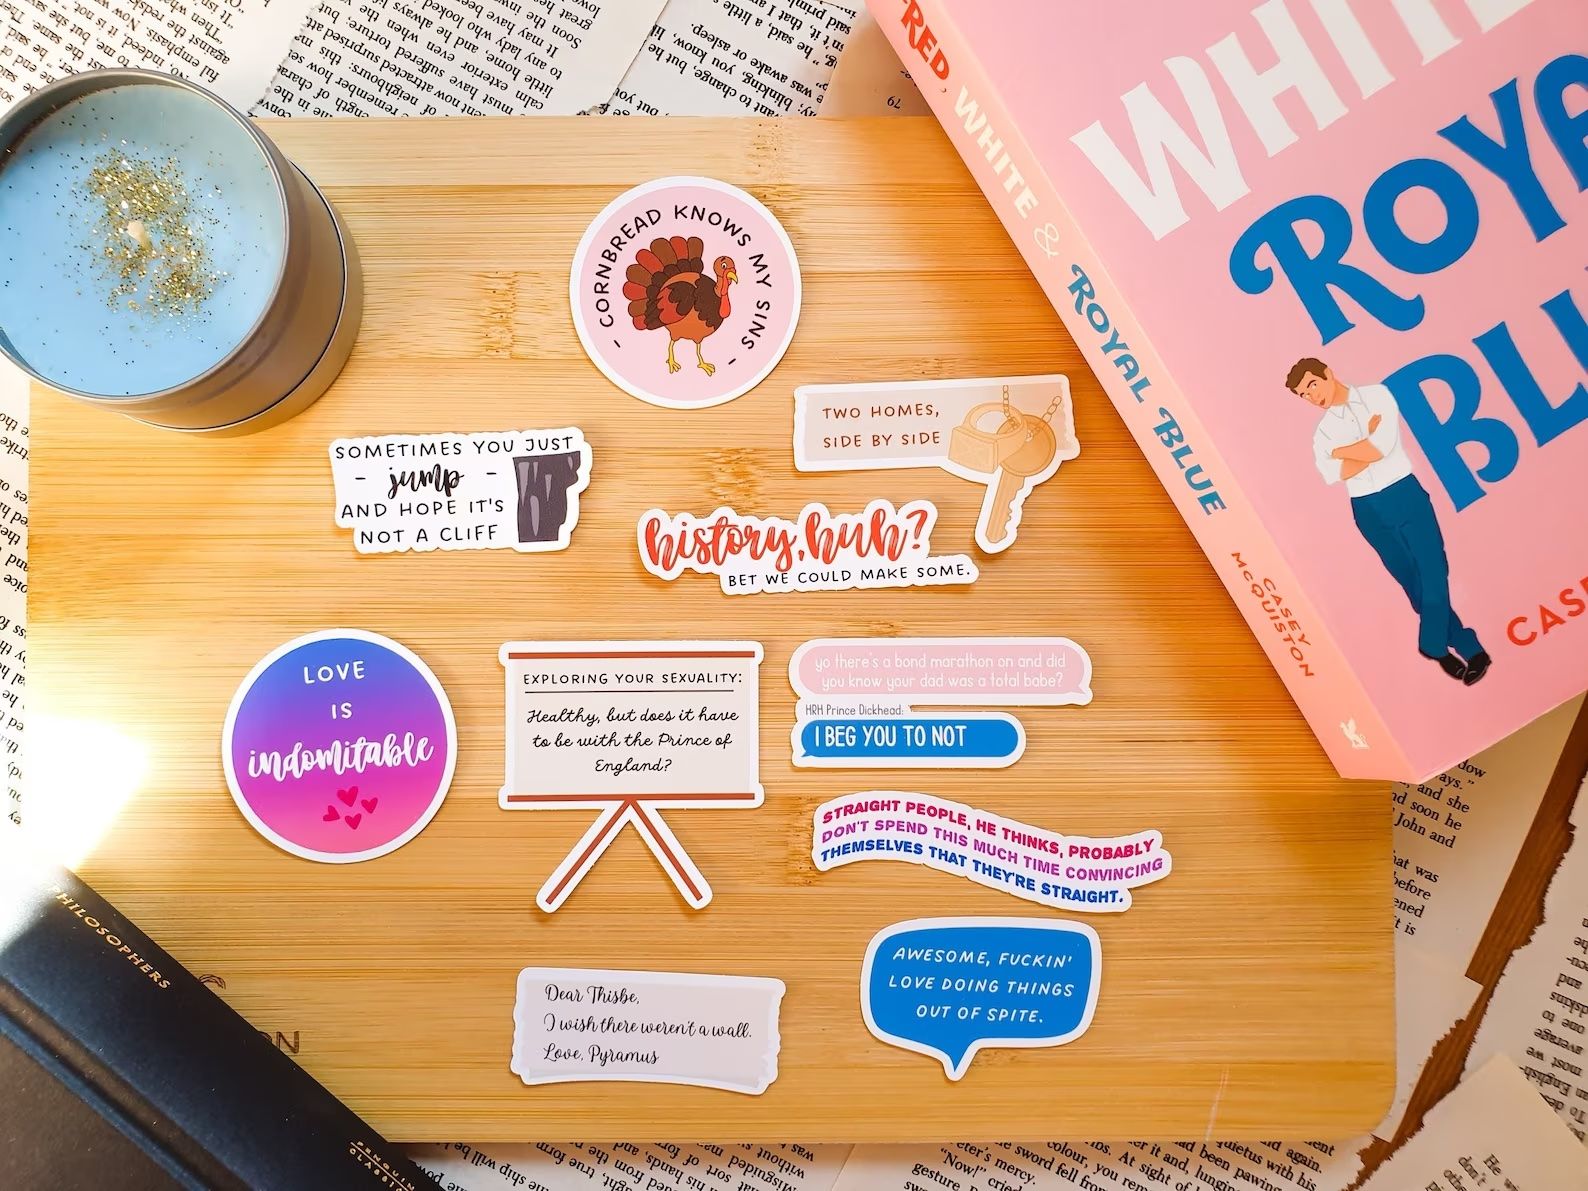 Red White and Royal Blue Matte Vinyl Stickers inspired by Casey McQuiston are on a wooden board with a copy of the book and a candle.